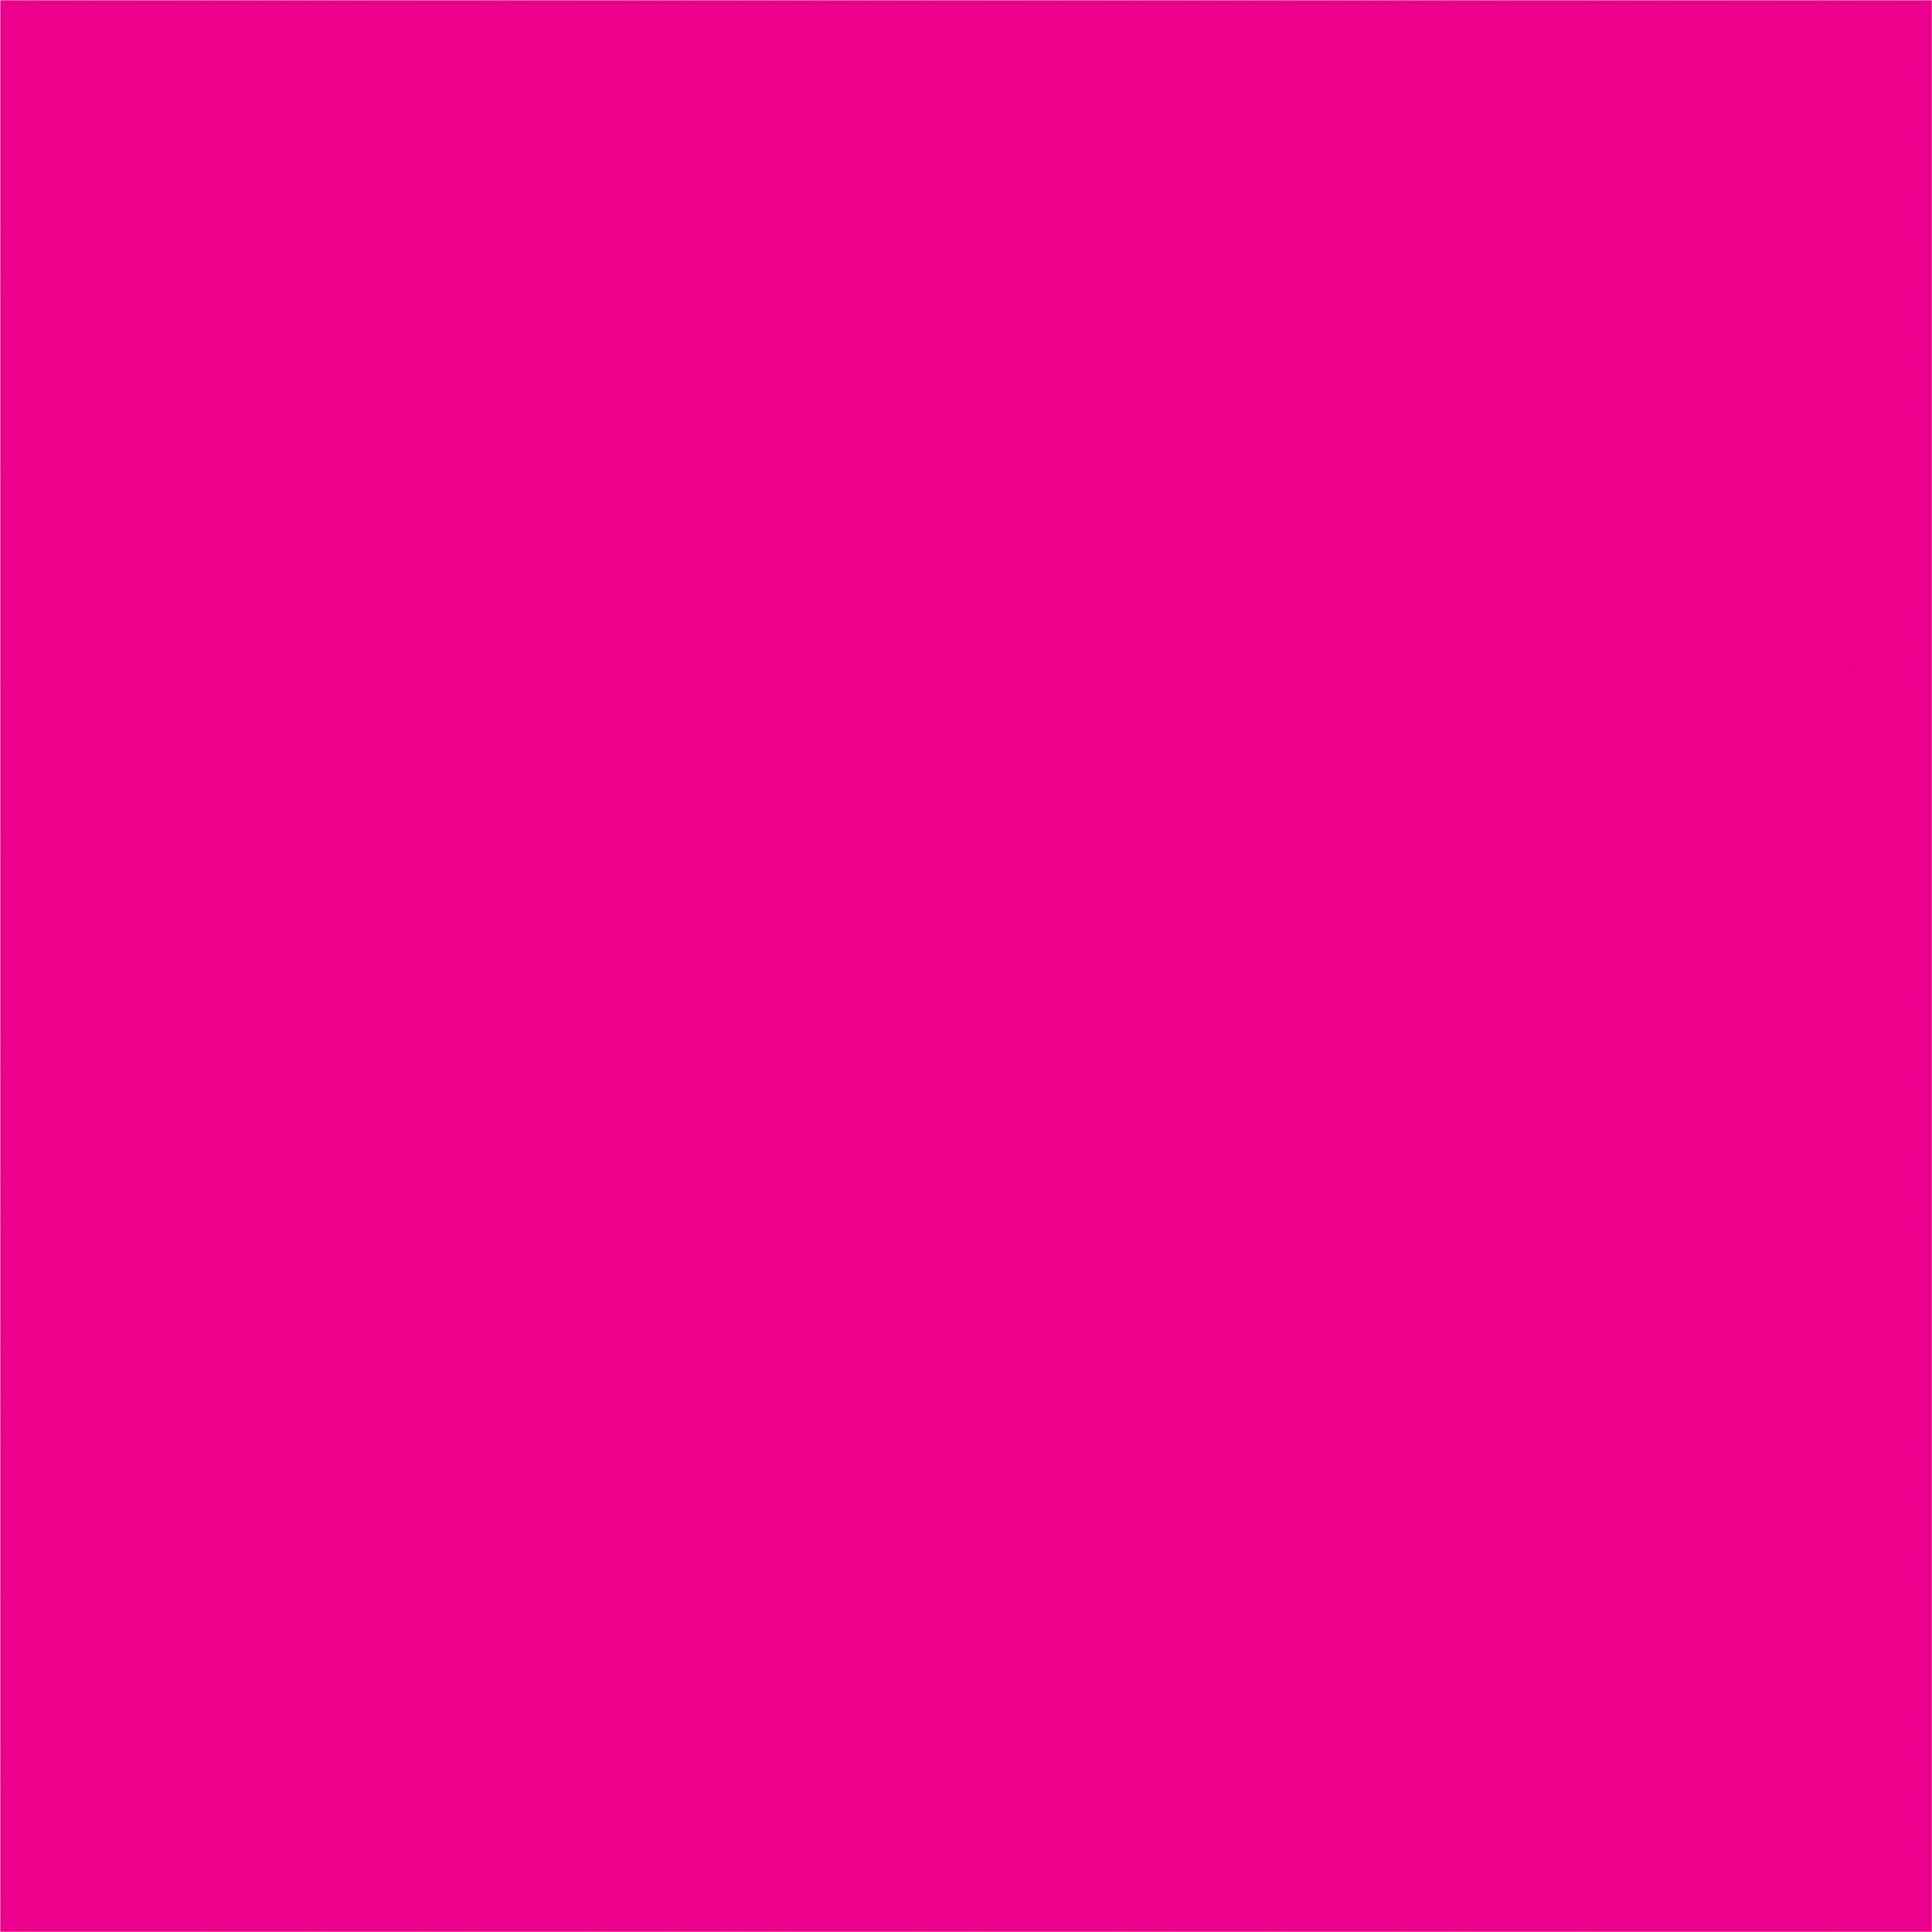 Buy the Neon Pink Plastic Paper Recollections®, 12" x 12" Michaels